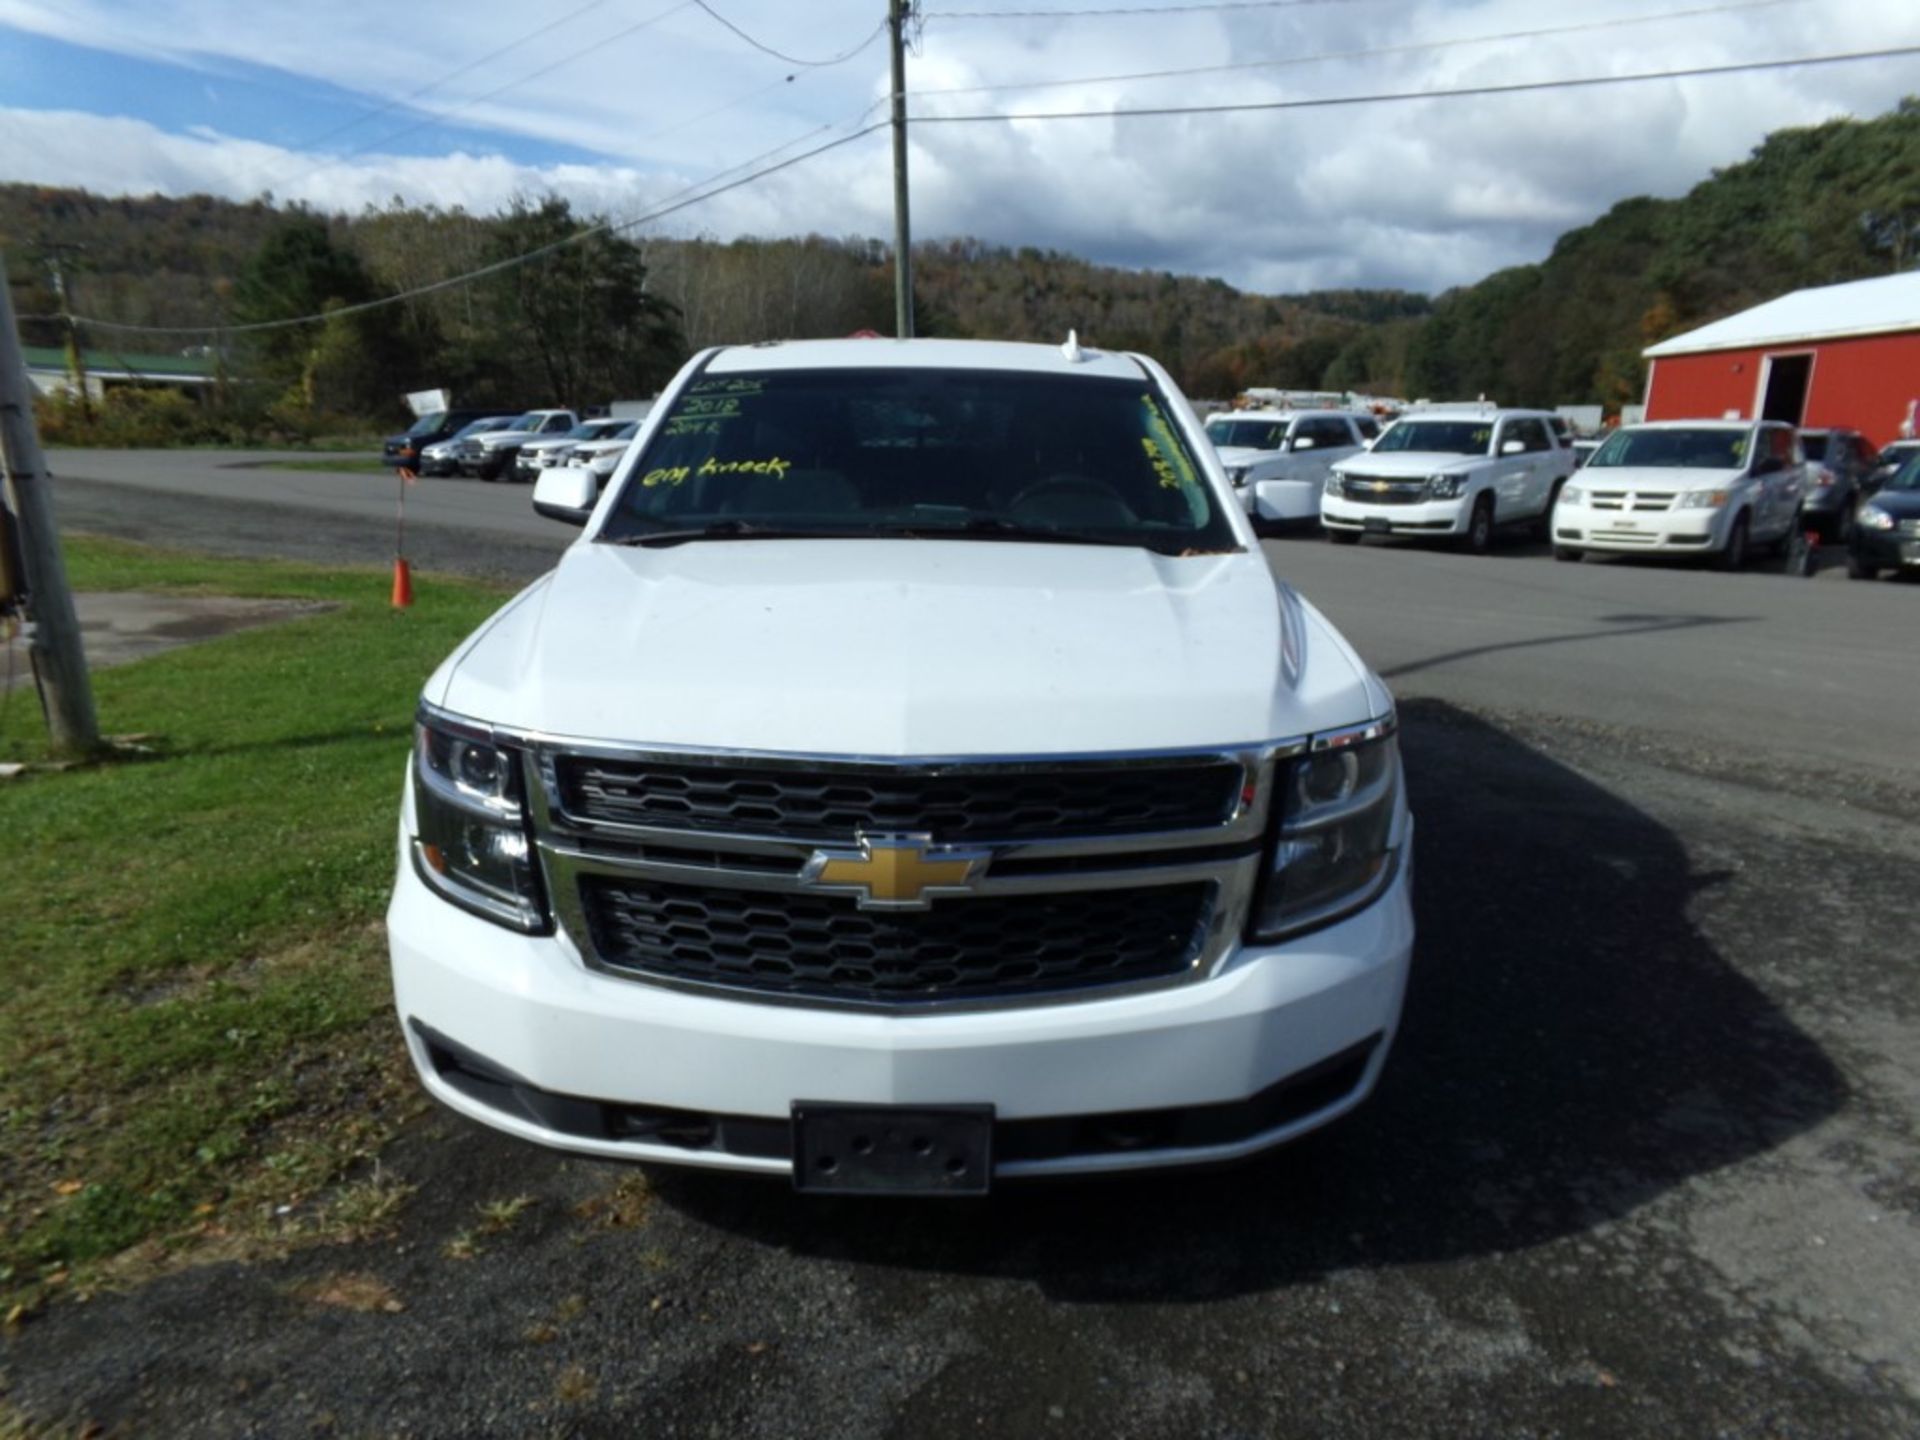 2018 Chevrolet Tahoe Commercial 4x4, White, 204,749 Mi, NEEDS MANIFOLD WORK, FACTORY CENTER - Image 2 of 5